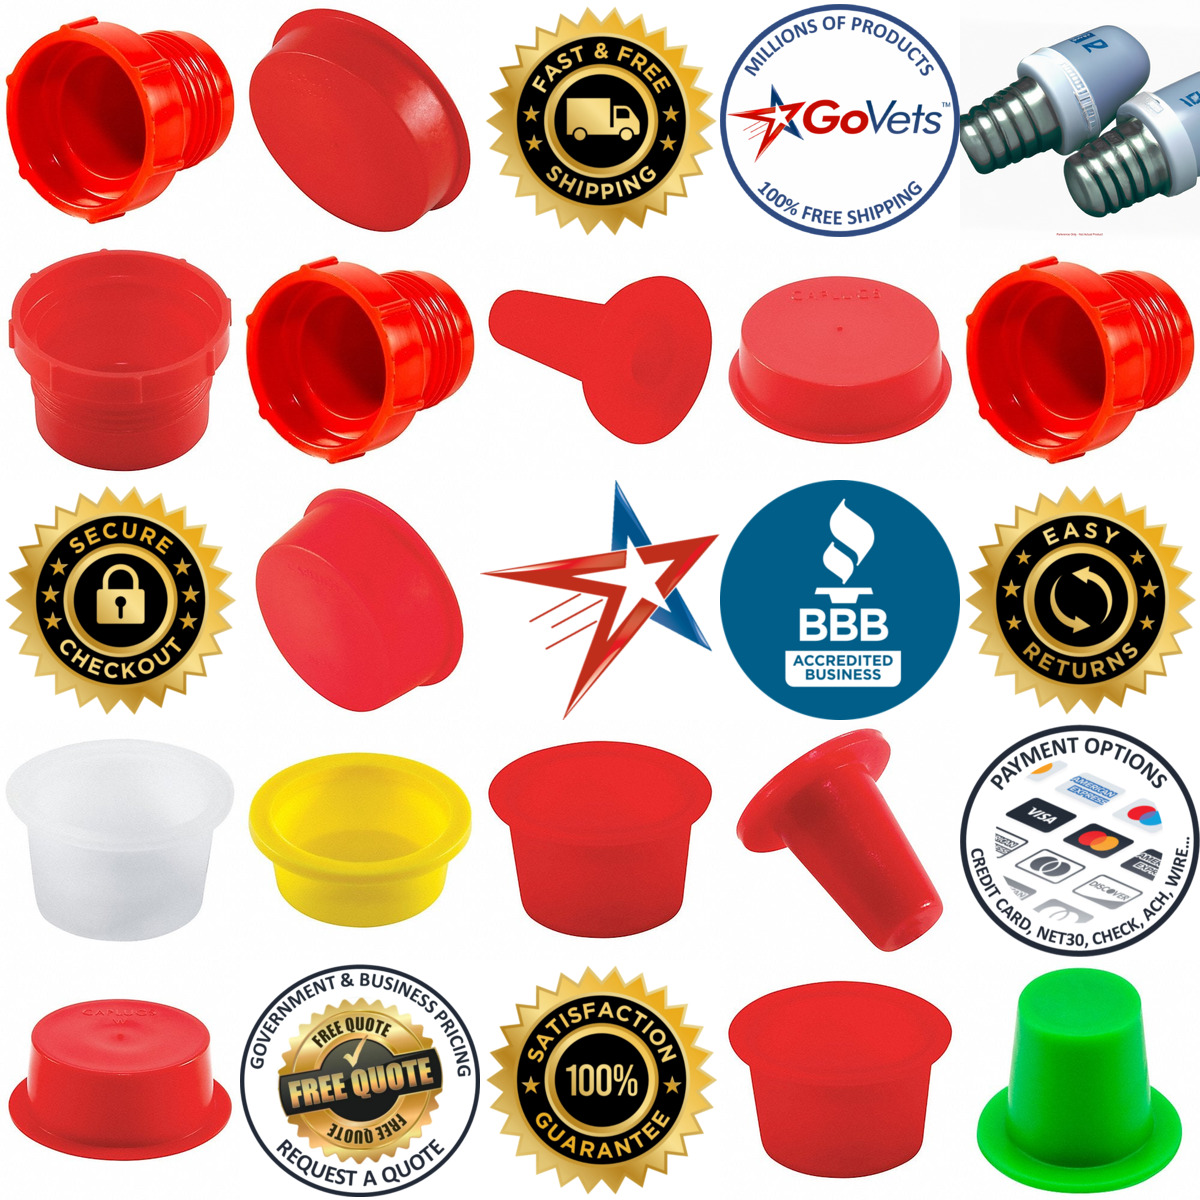 A selection of Reversible Tapered Cap and Plugs products on GoVets